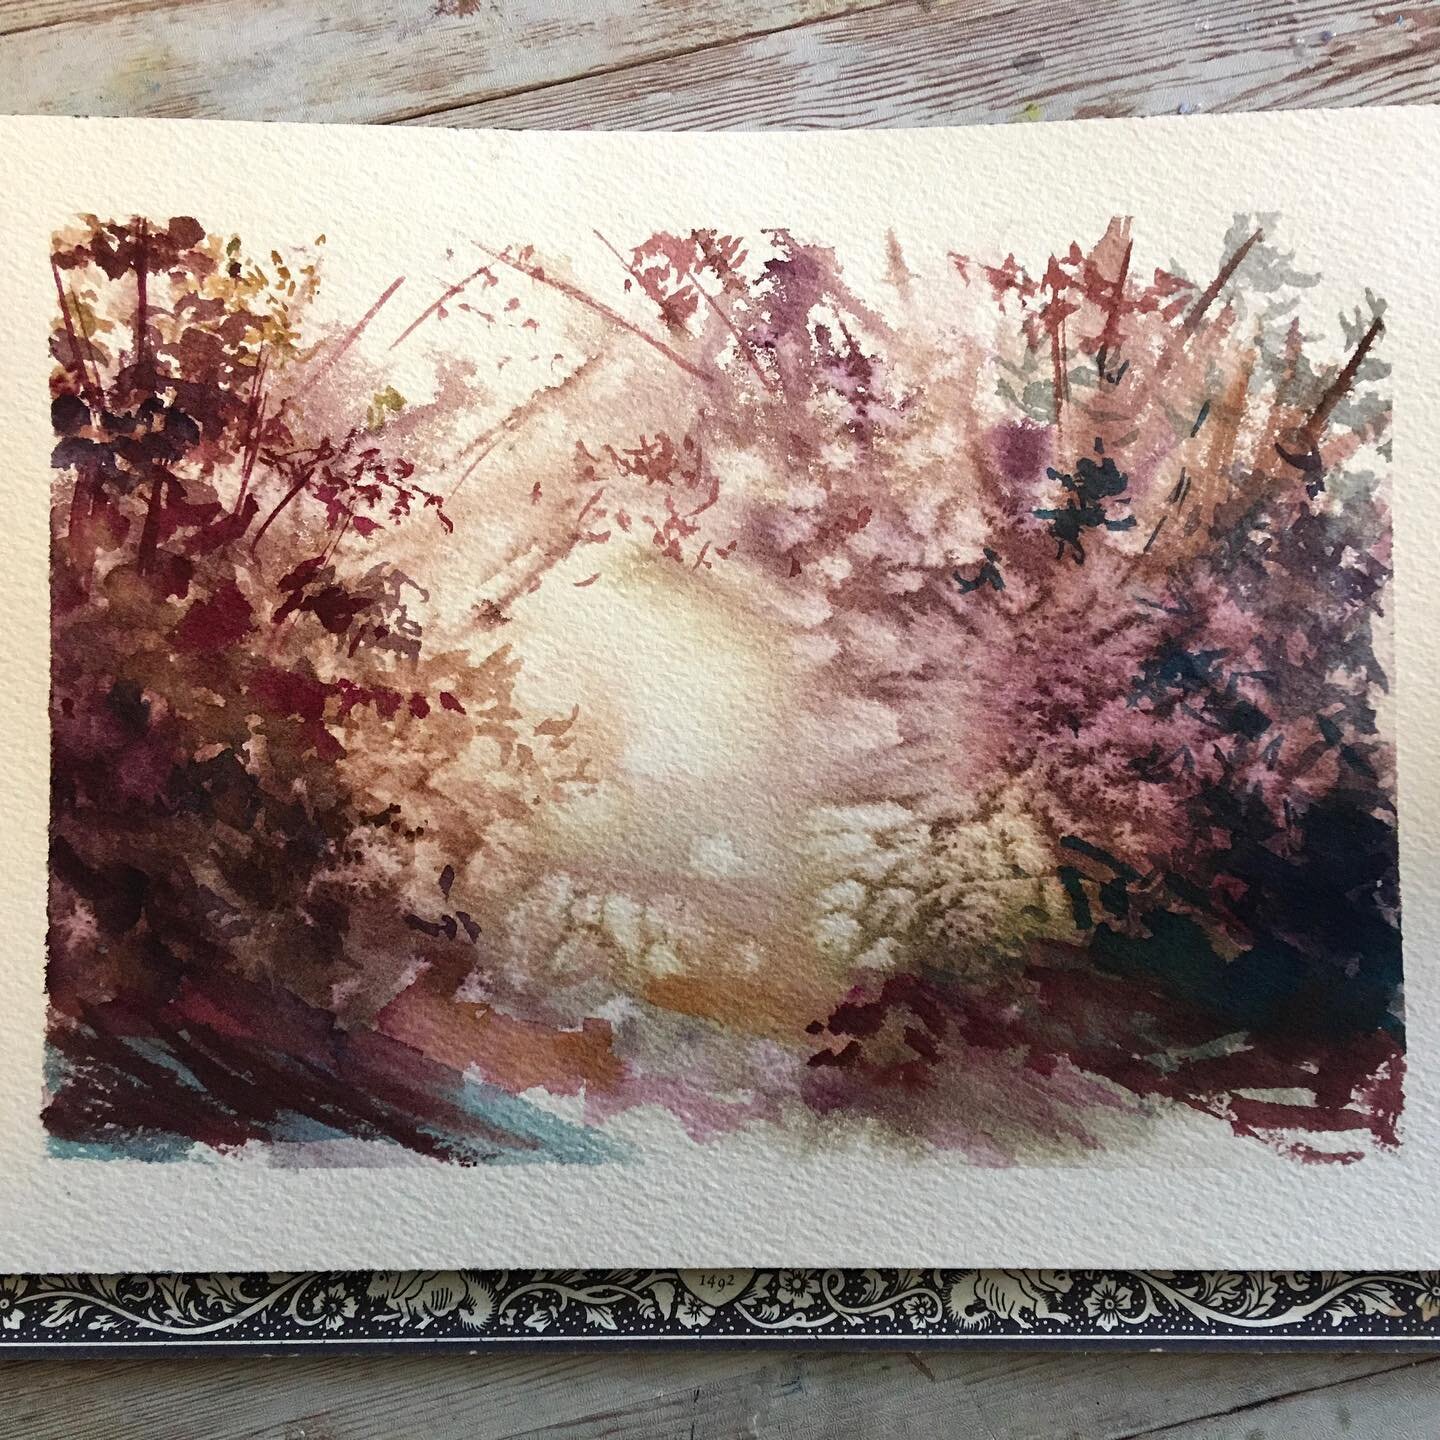 #watercolor #landscape #painting #semiabstract #atmospheric #mgraham #sketching #sketch #forest #sunlight #autumn #fall #painter